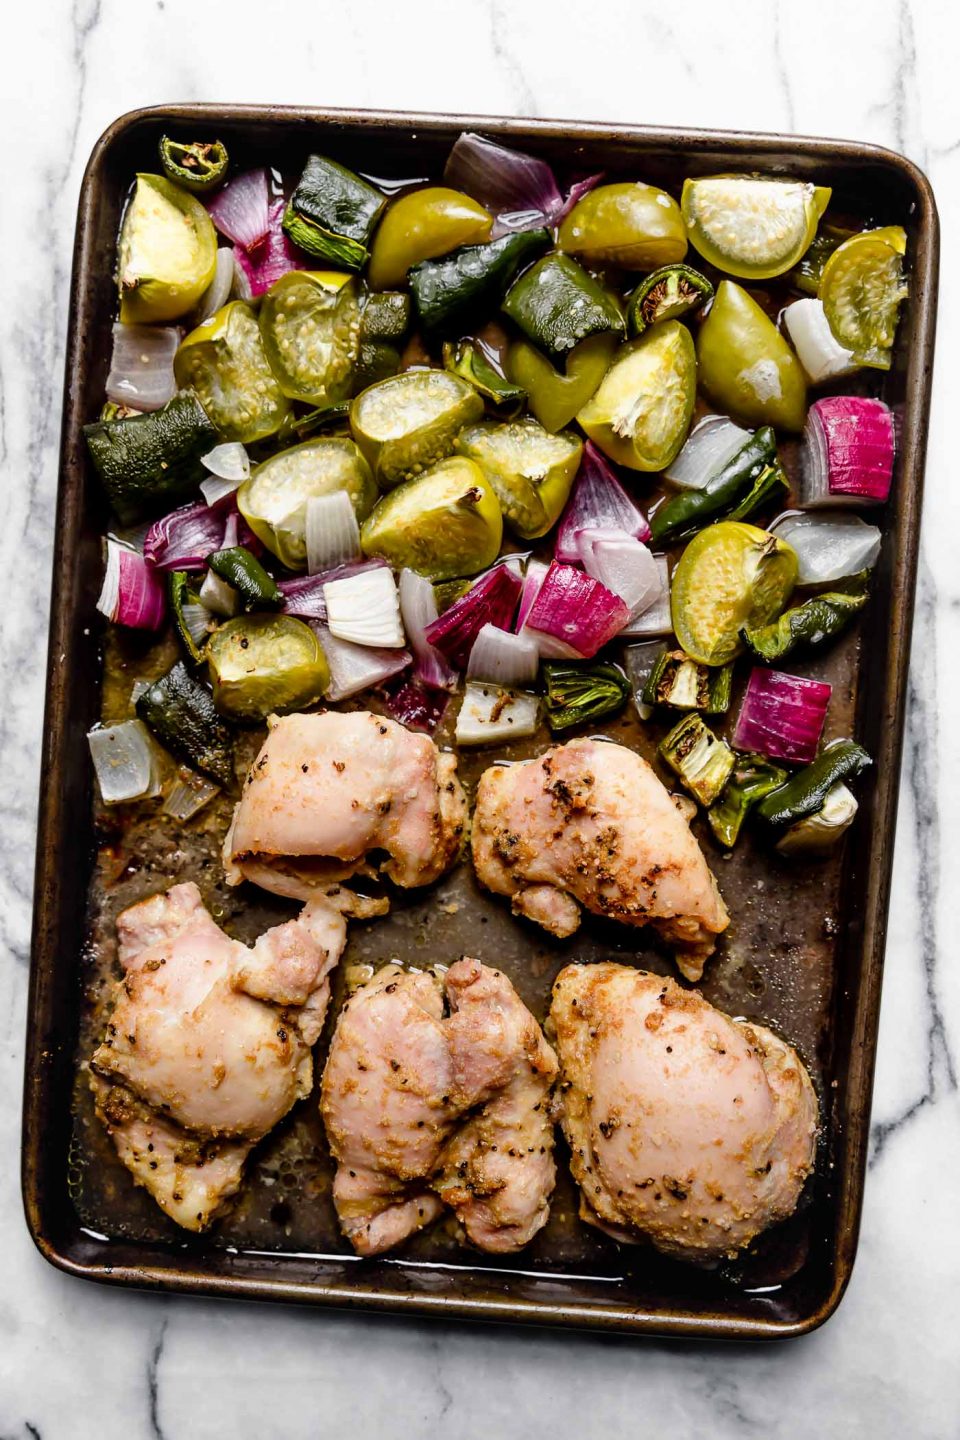 Salsa verde chicken ingredients (chicken thighs, tomatillos, red onion, jalapeno & poblano) on a sheet pan after having been roasted. Roasted veggies are one one side of the pan and the chicken is opposite. Sheet pan is placed on a white marble surface.